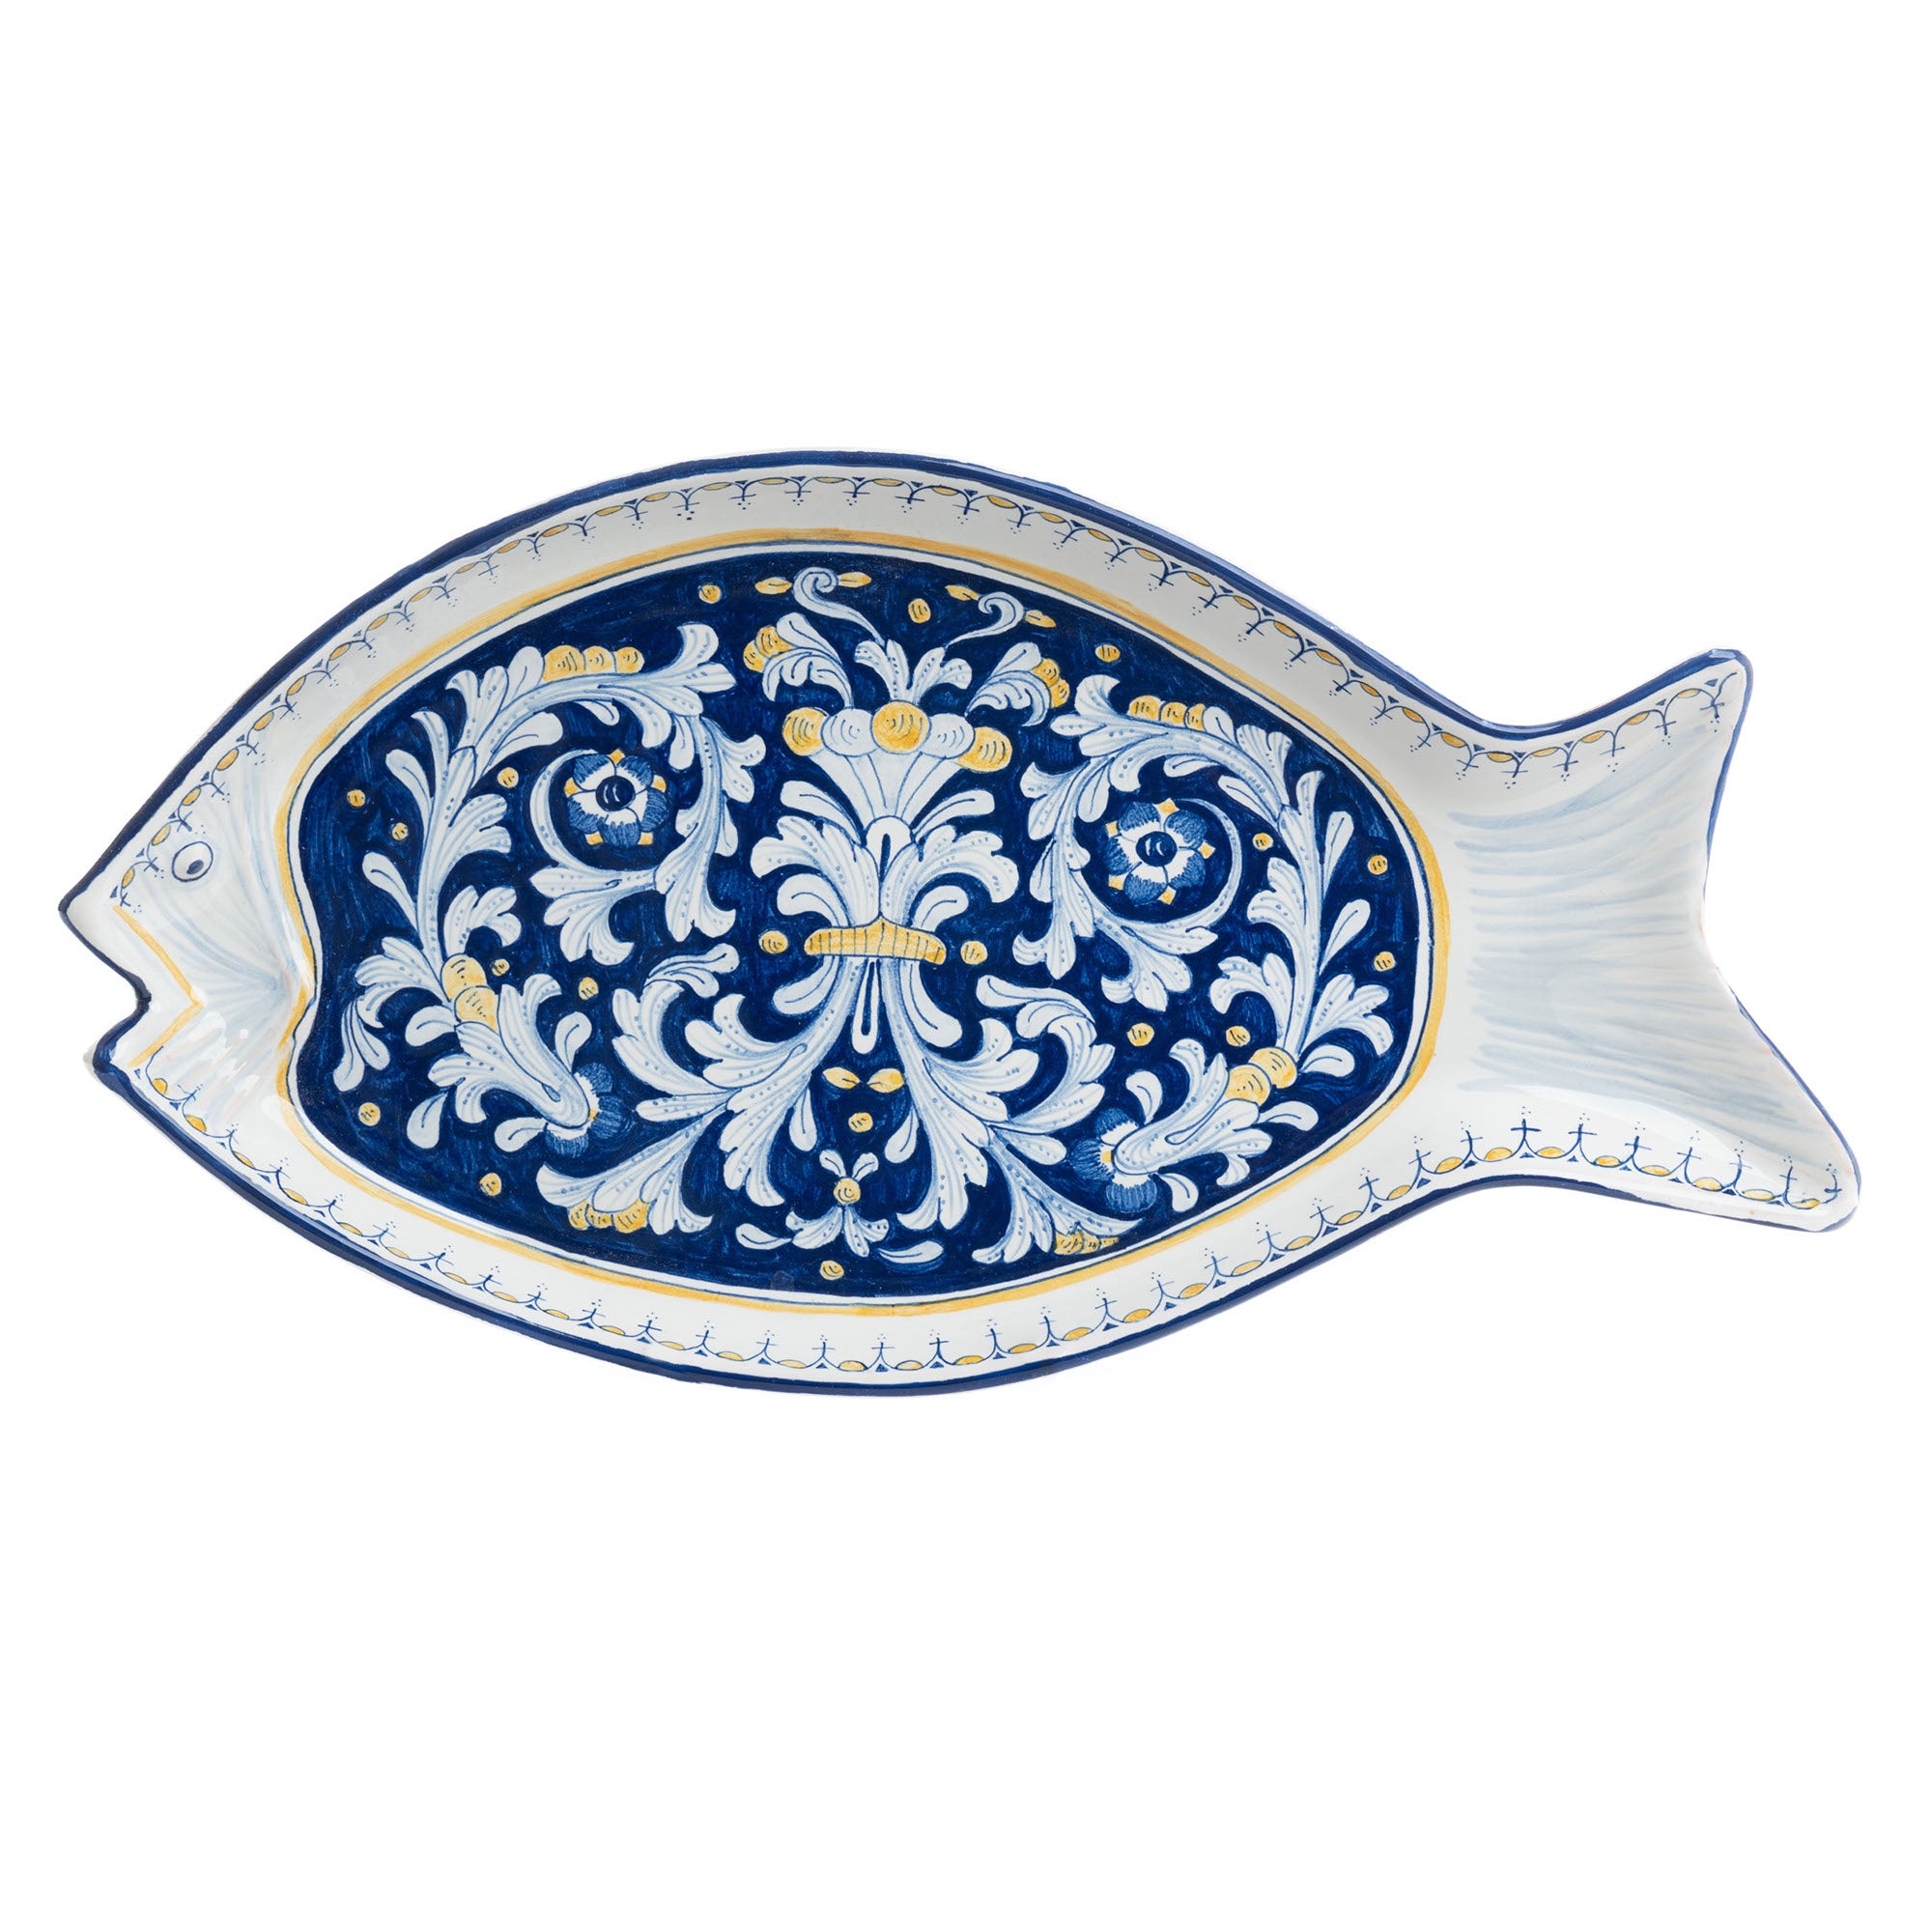 Antico Deruta Fish Platter, ceramics, pottery, italian design, majolica, handmade, handcrafted, handpainted, home decor, kitchen art, home goods, deruta, majolica, Artisan, treasures, traditional art, modern art, gift ideas, style, SF, shop small business, artists, shop online, landmark store, legacy, one of a kind, limited edition, gift guide, gift shop, retail shop, decorations, shopping, italy, home staging, home decorating, home interiors